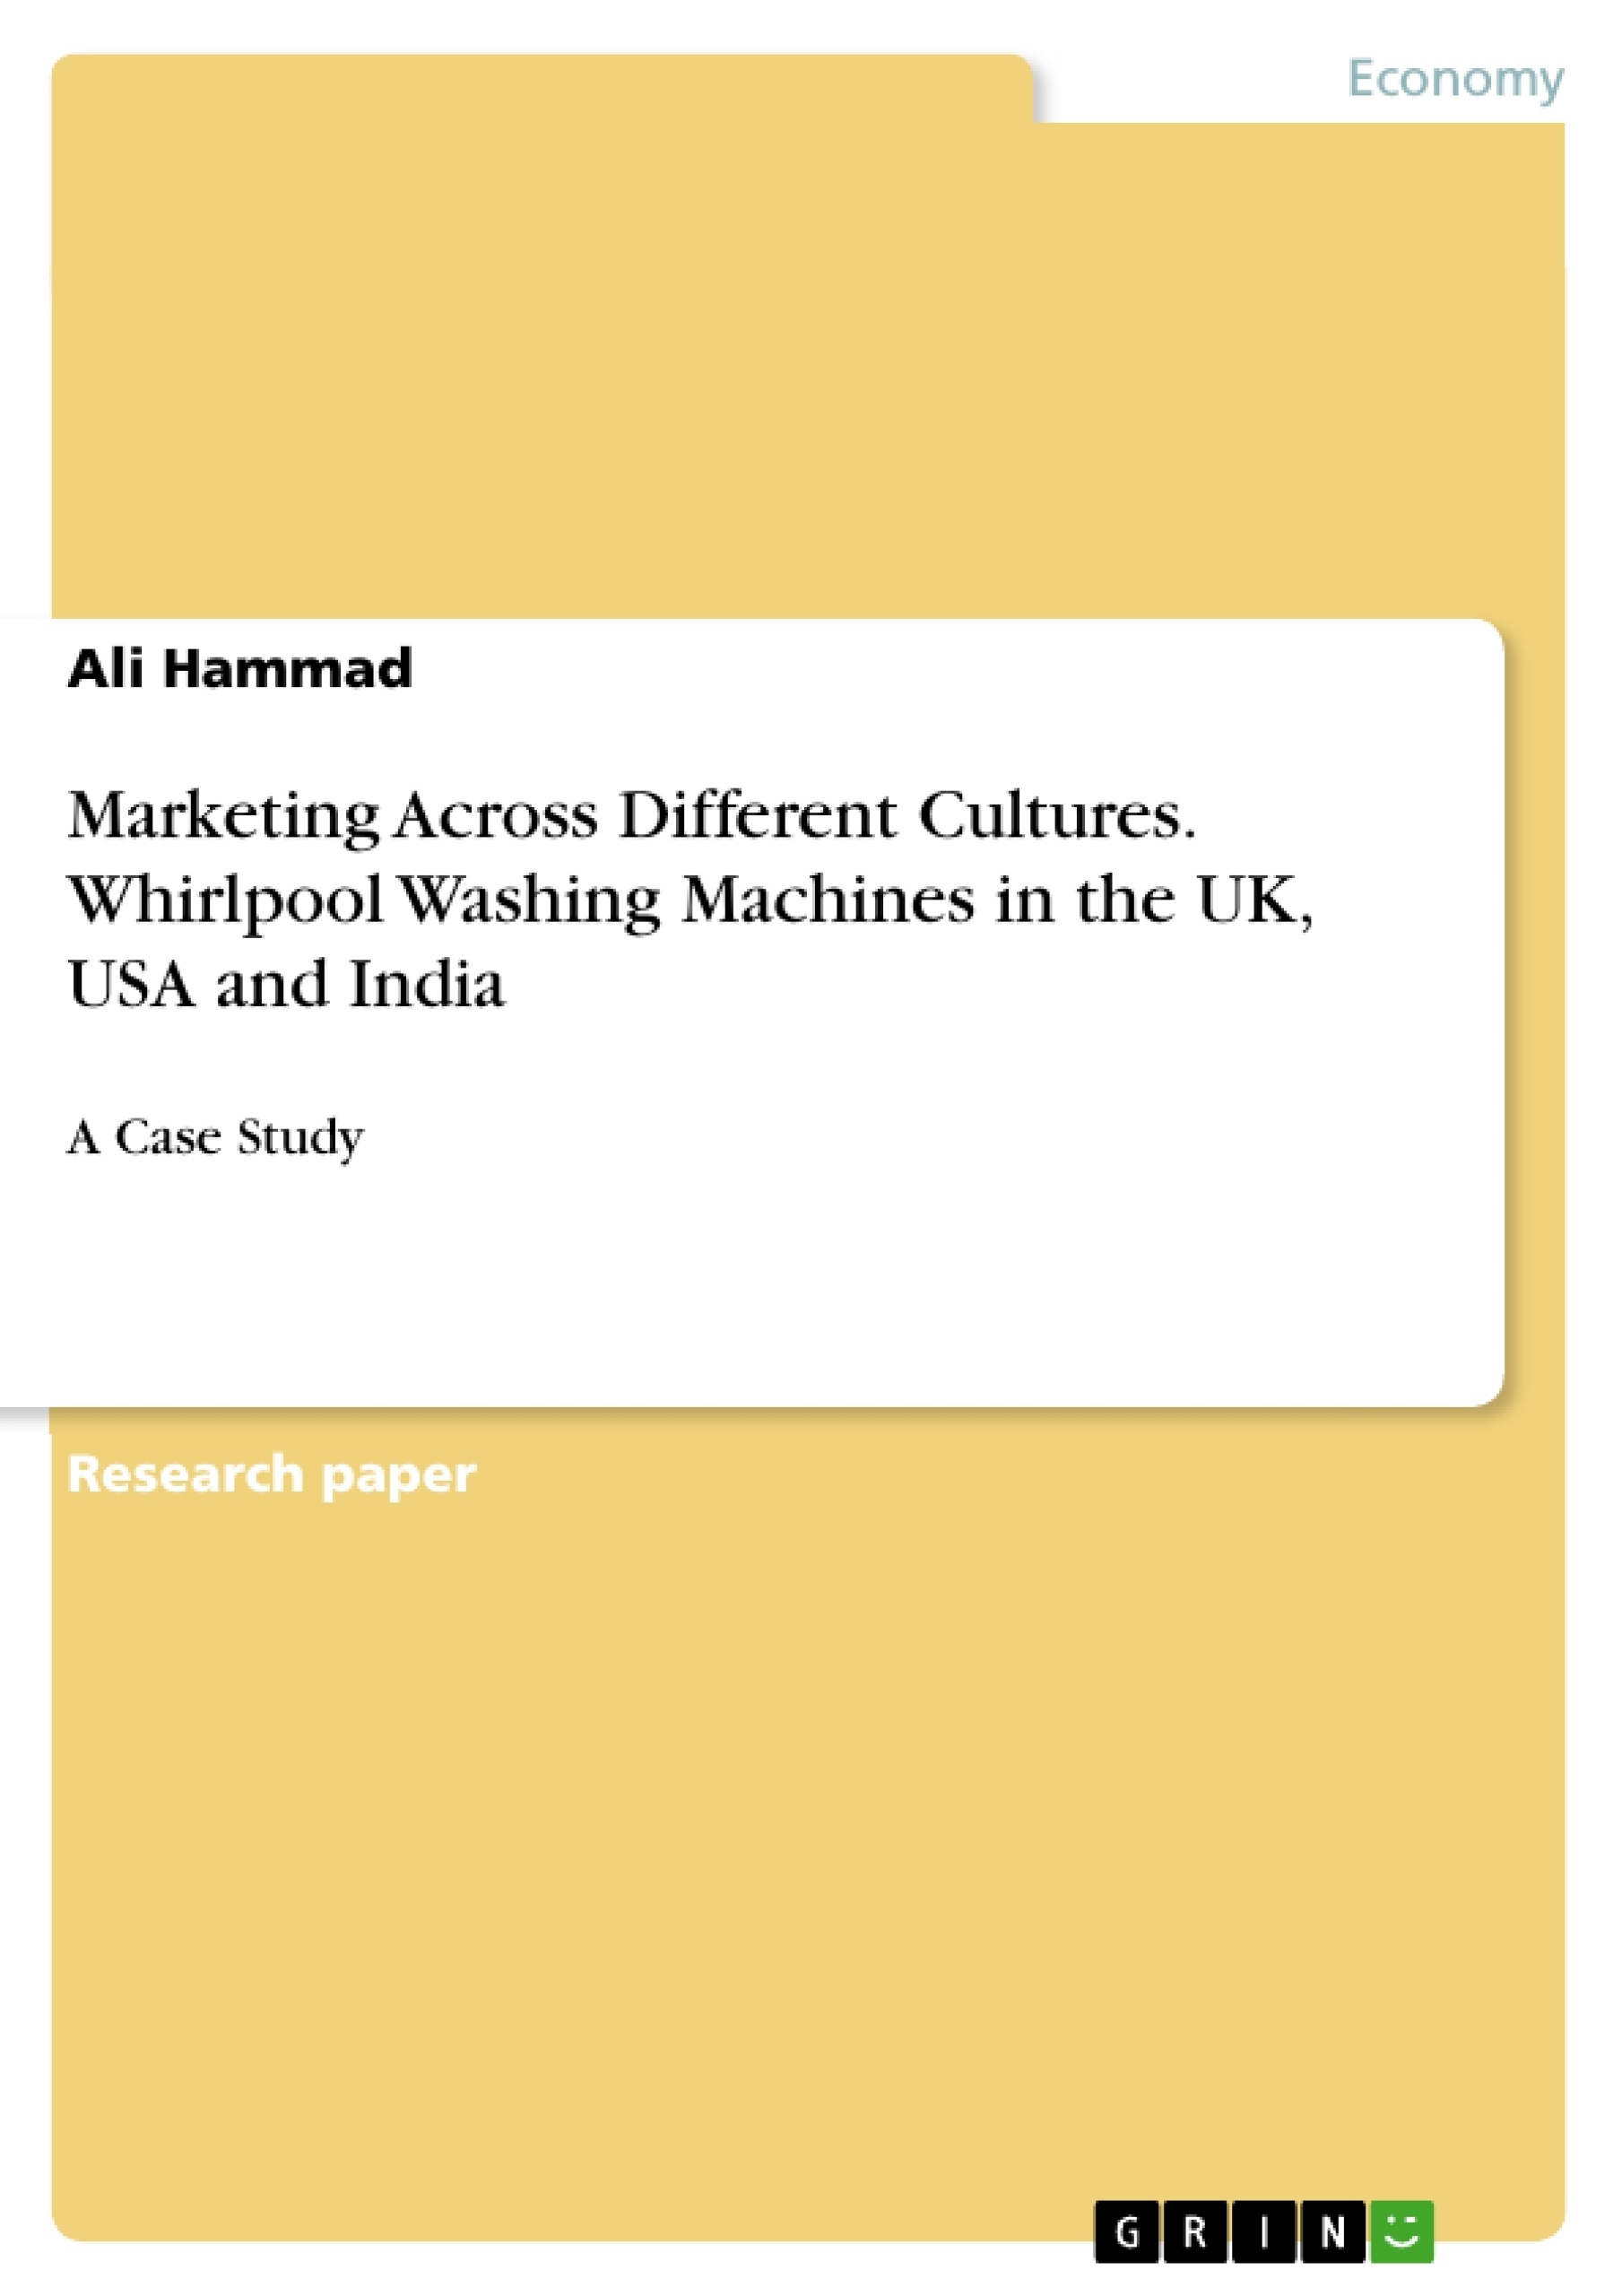 Título: Marketing Across Different Cultures. Whirlpool Washing Machines in the UK, USA and India